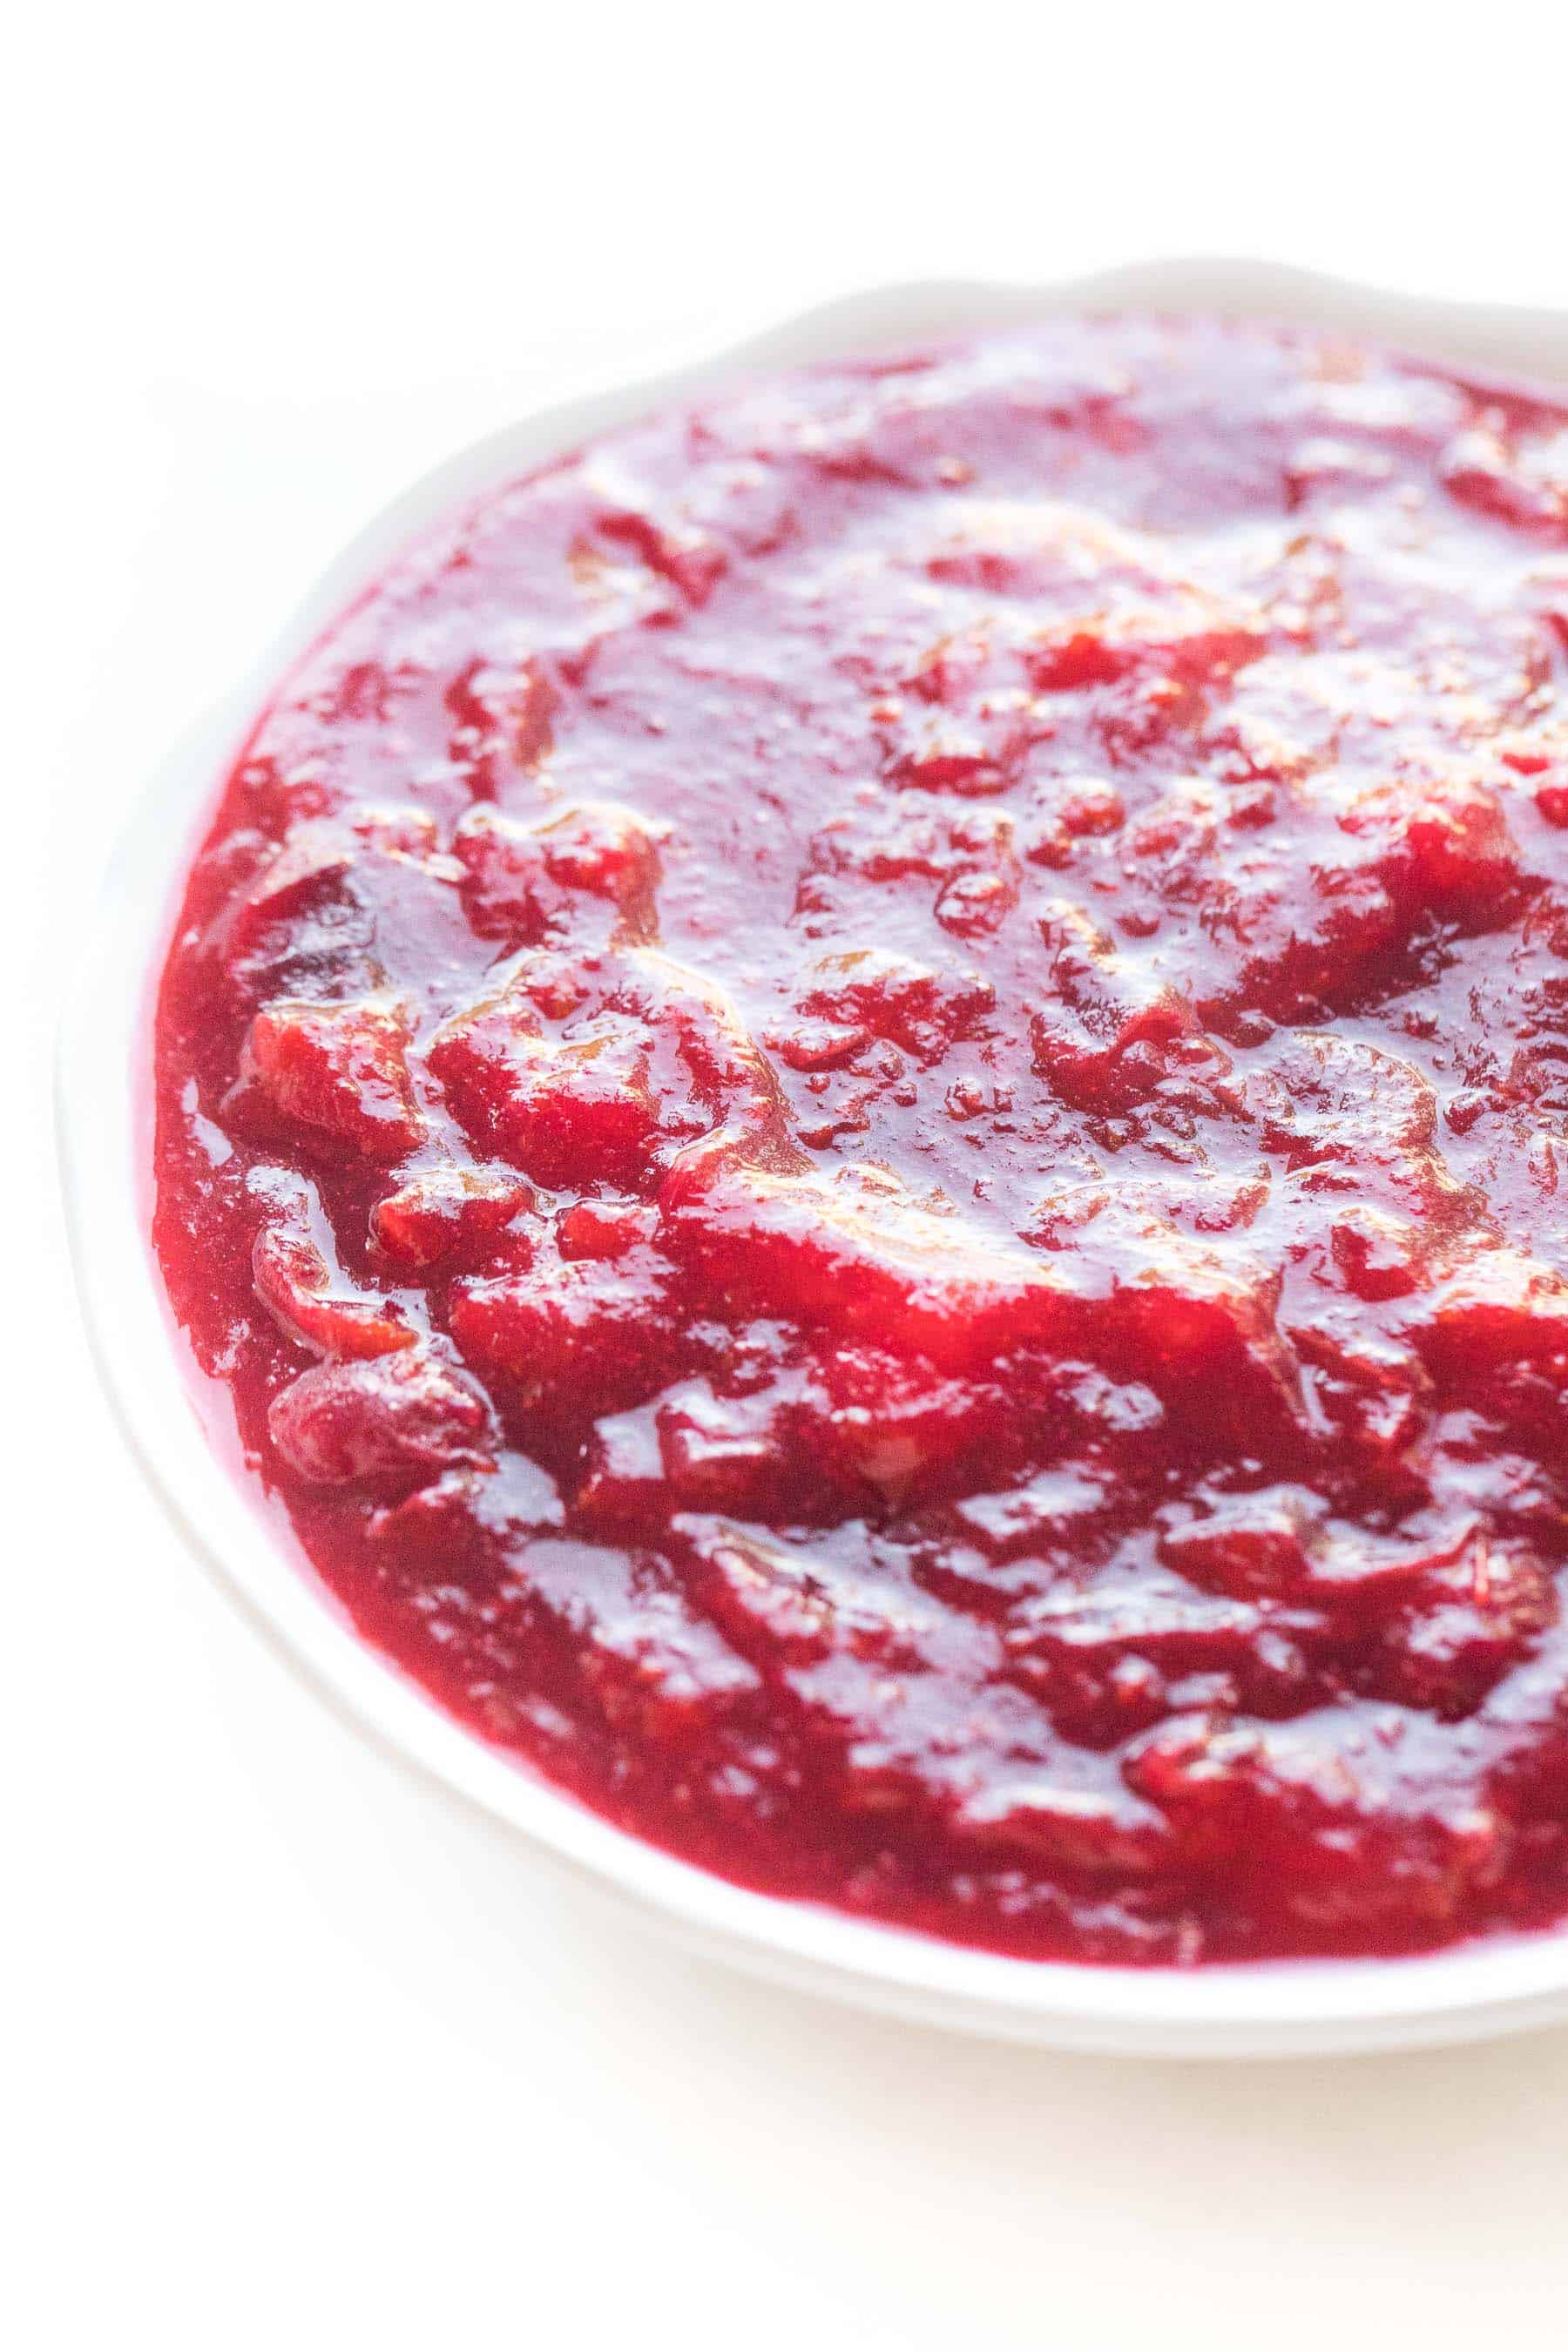 keto cranberry sauce in a white bowl